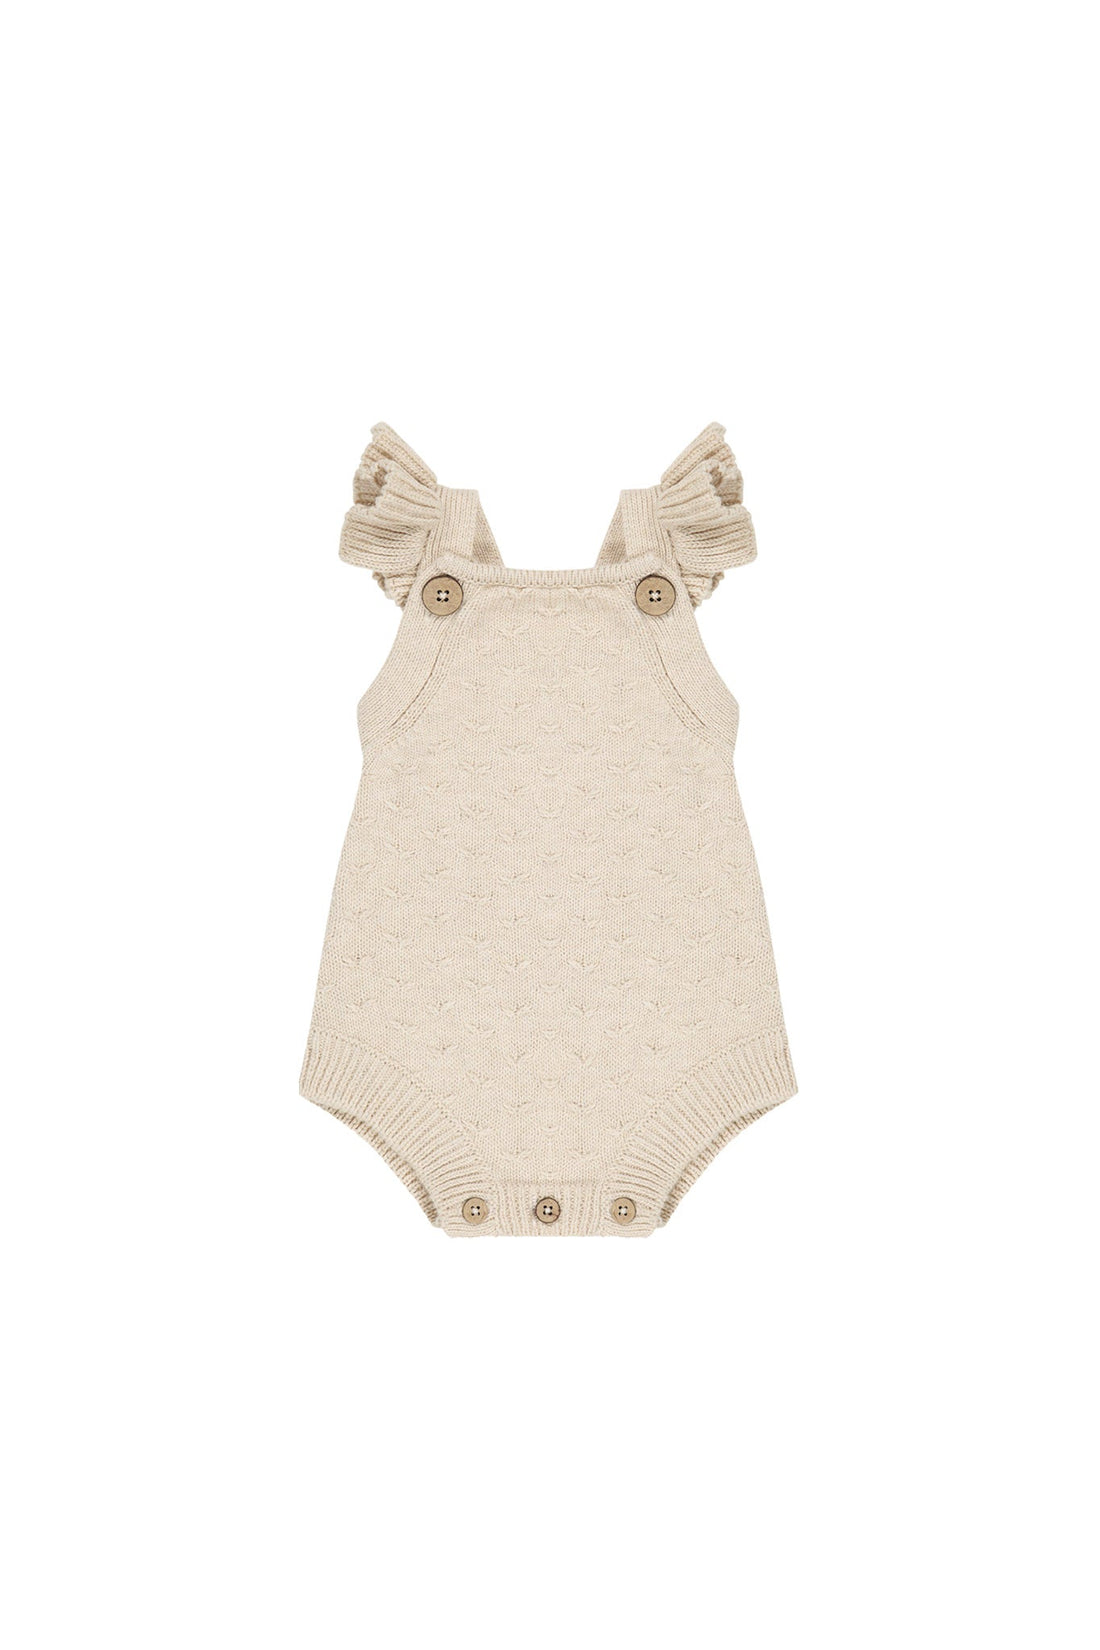 Mia Knitted Romper - Oatmeal Marle Childrens Romper from Jamie Kay USA